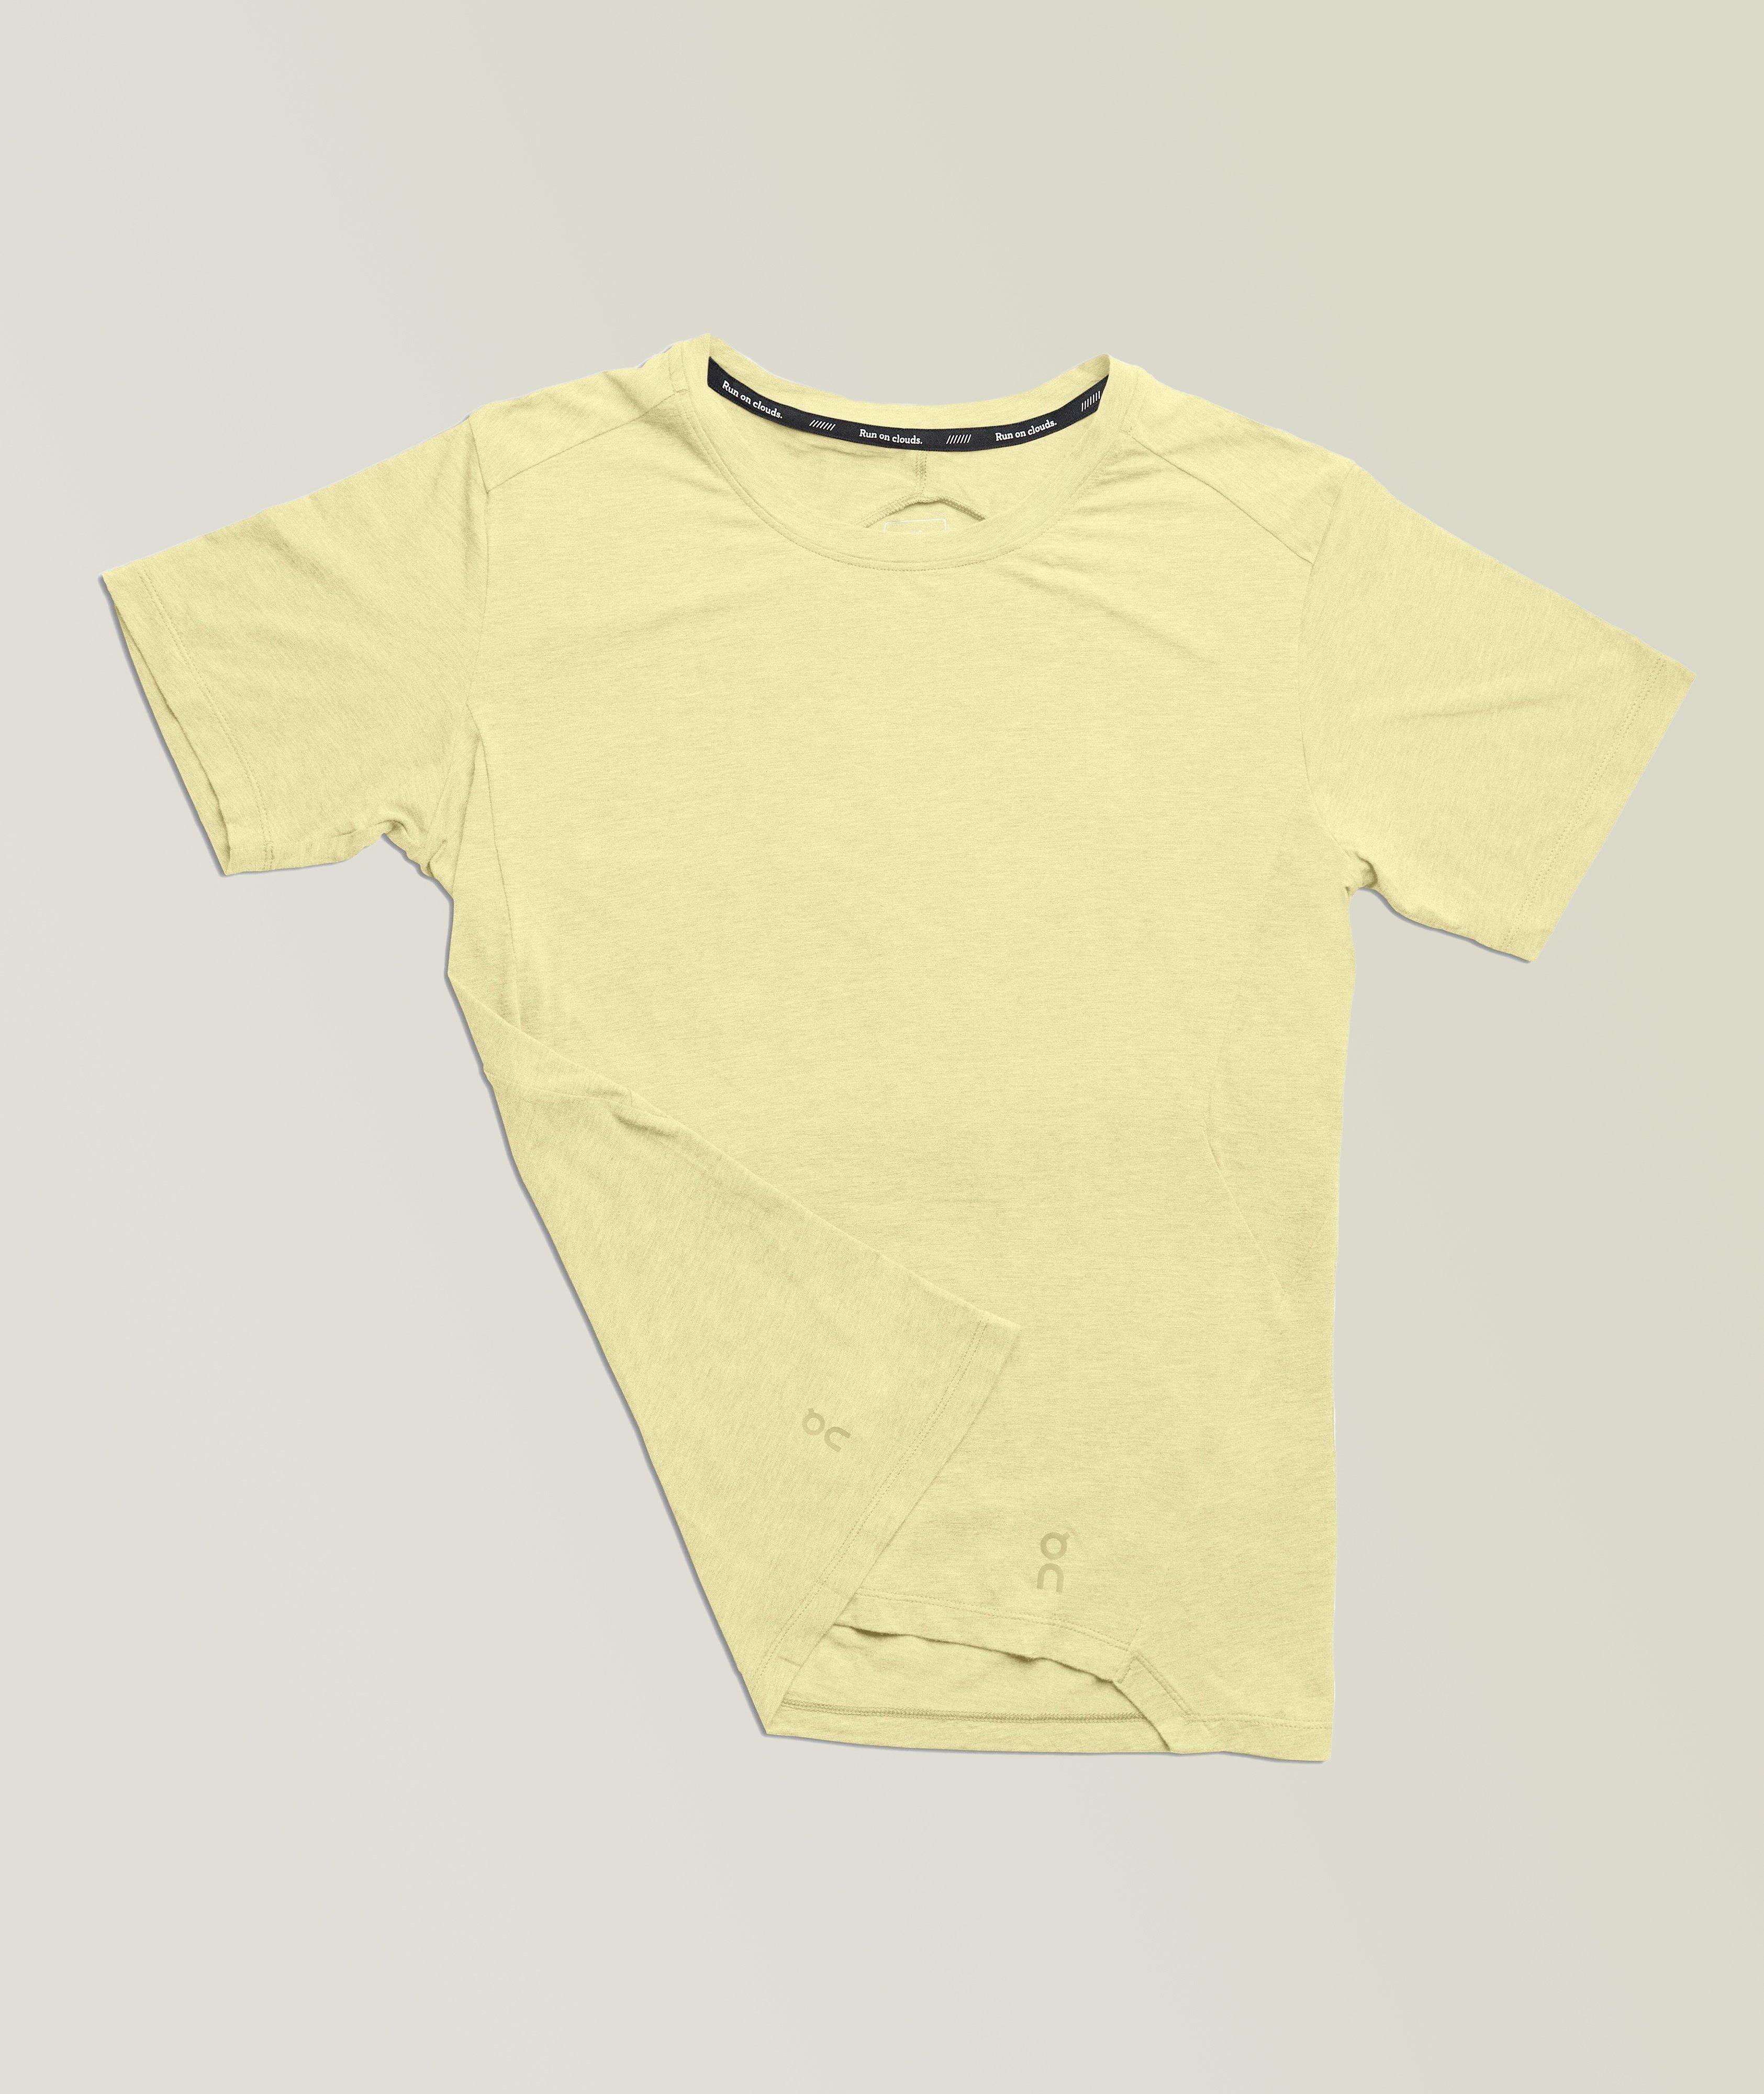 On-T Stretch-Cotton Performance T-Shirt image 0